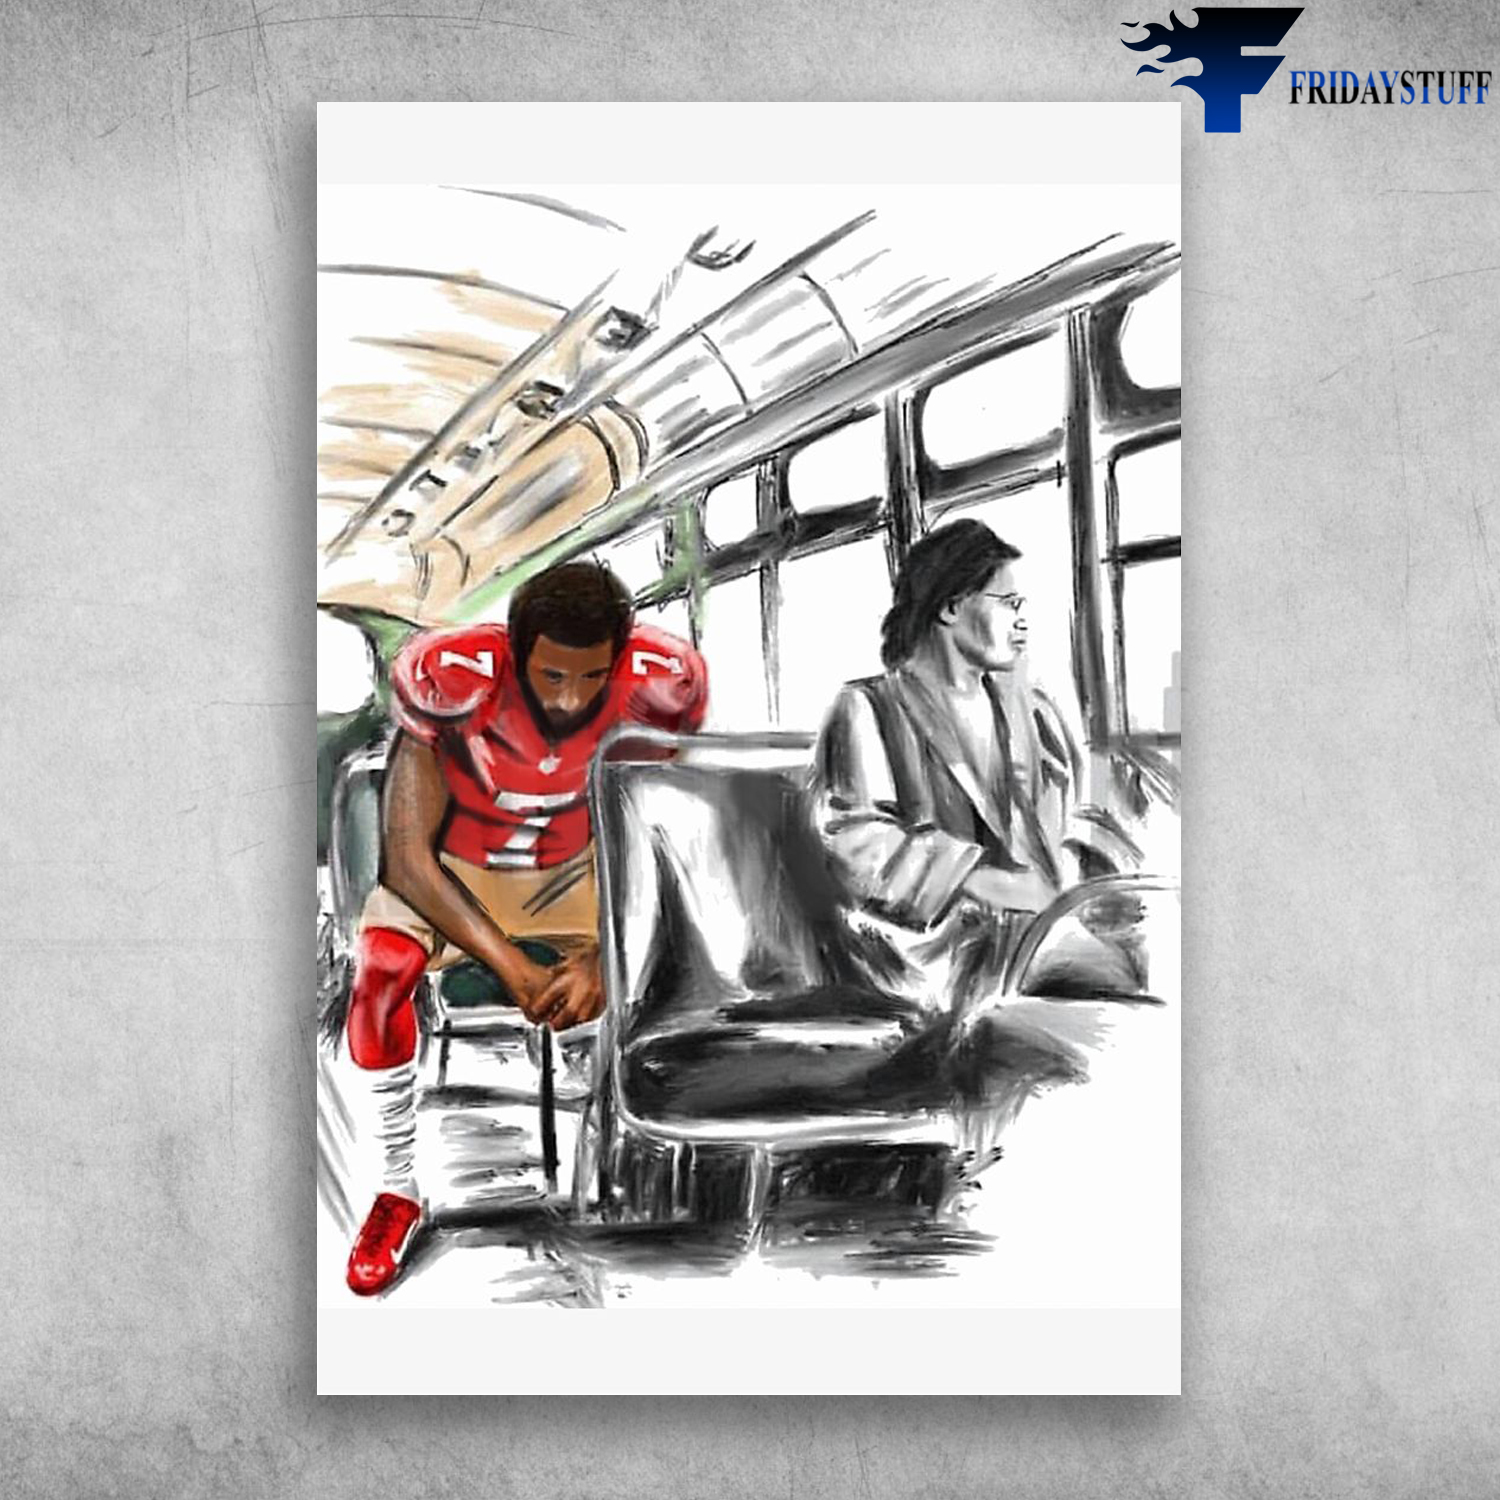 Rosa Parks And Colin Kaepernick On The Bus